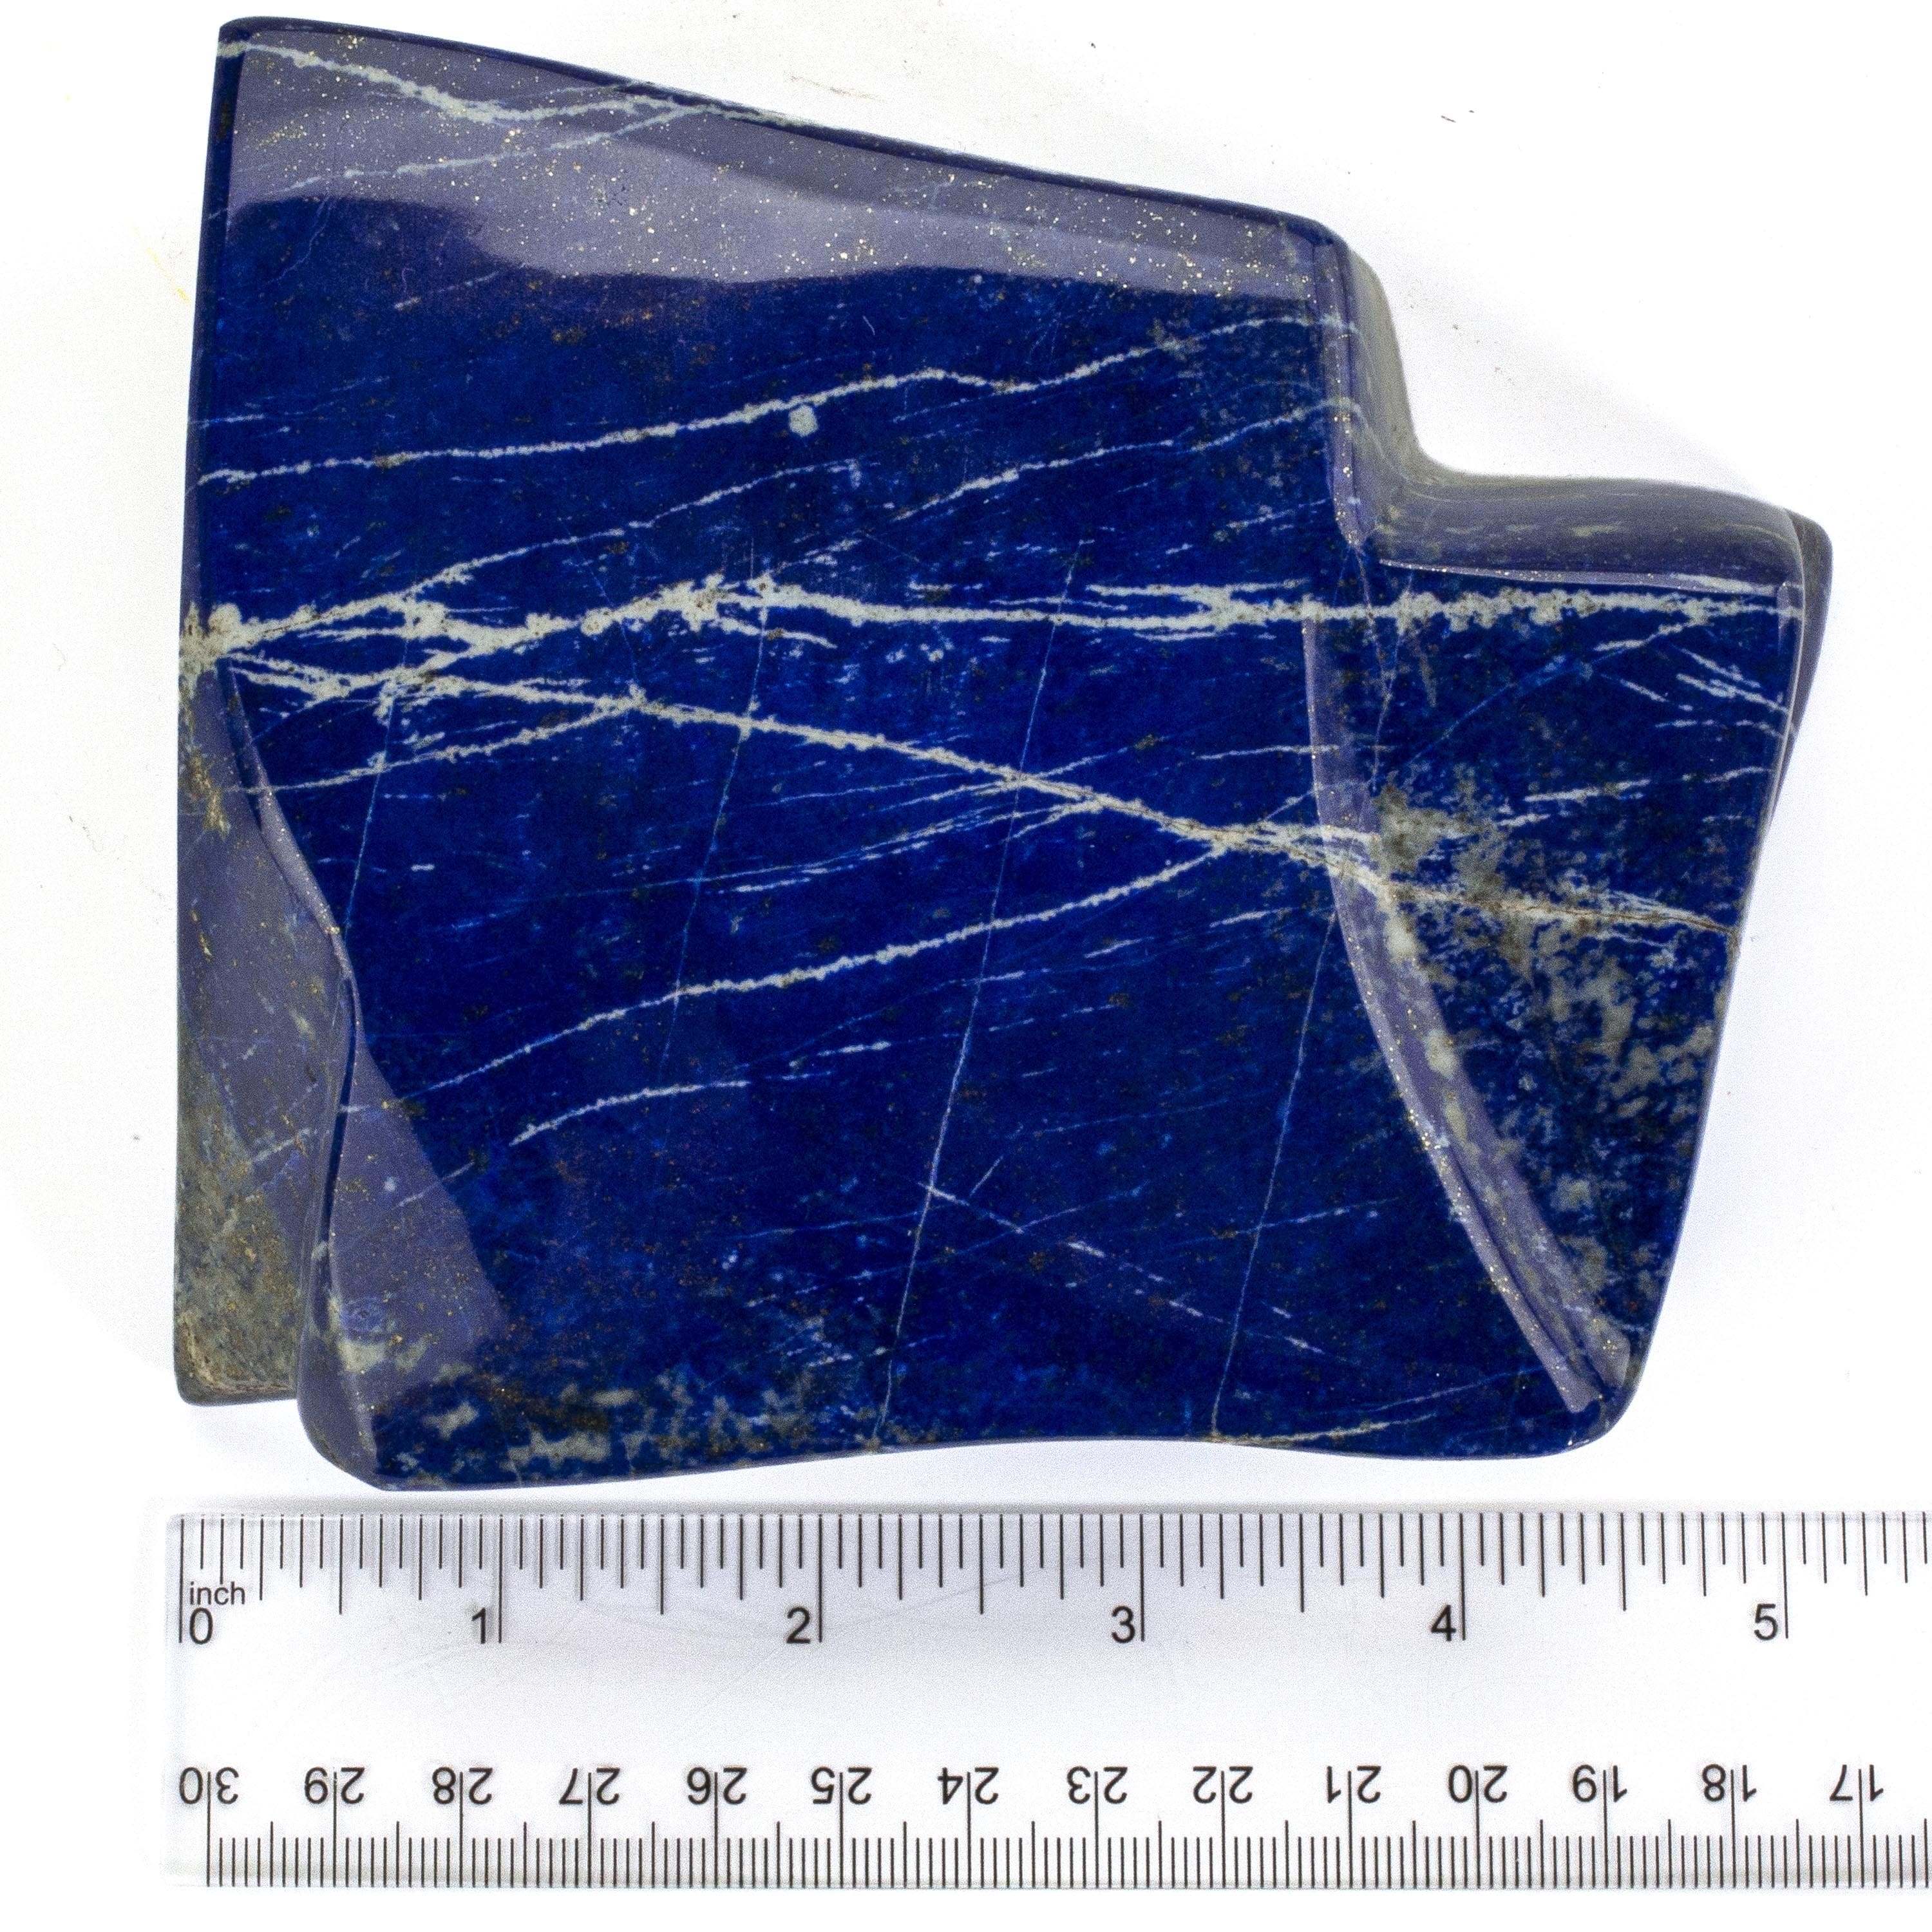 Kalifano Lapis Lapis Lazuil Freeform from Afghanistan - 1.3 kg / 2.8 lbs LP1400.002